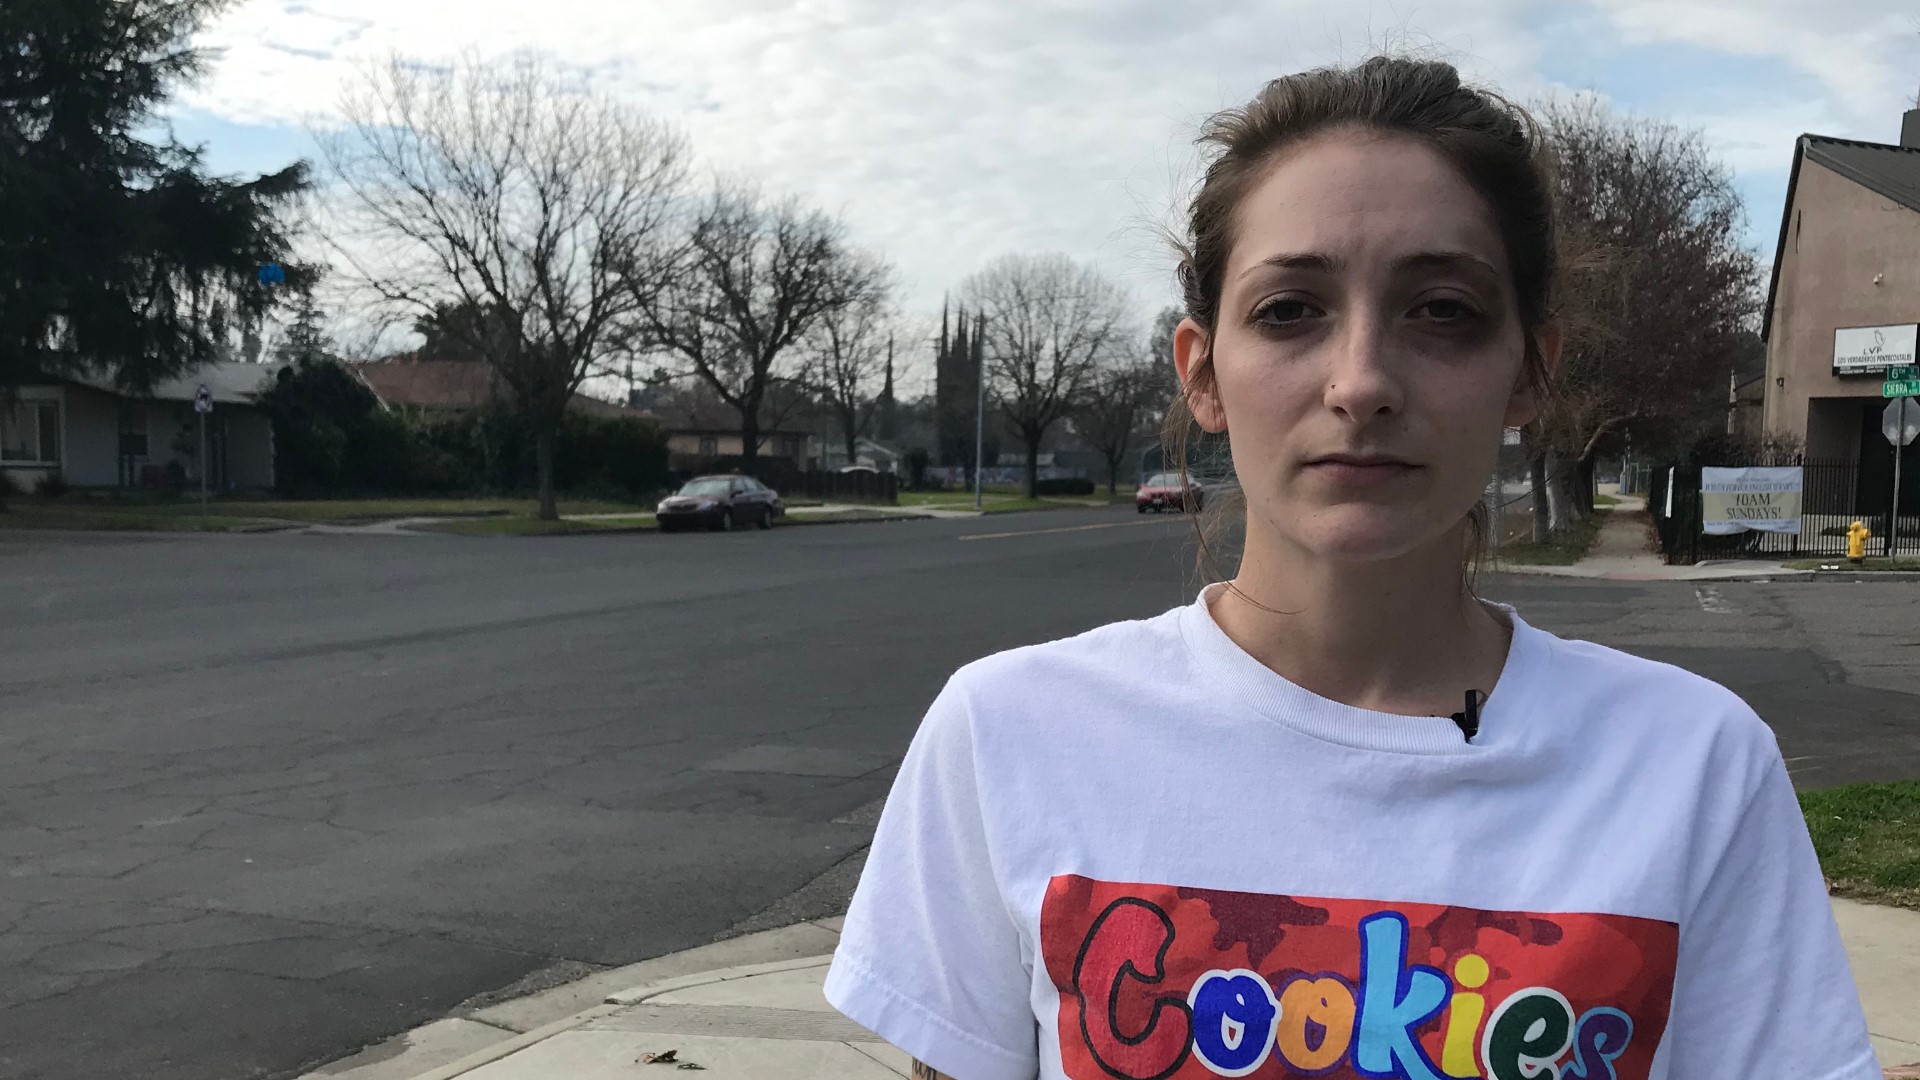 Kayleen Gleason said the accident is the fourth hit-and-run she's experienced in Modesto. But this is the first time the police has caught the suspect.